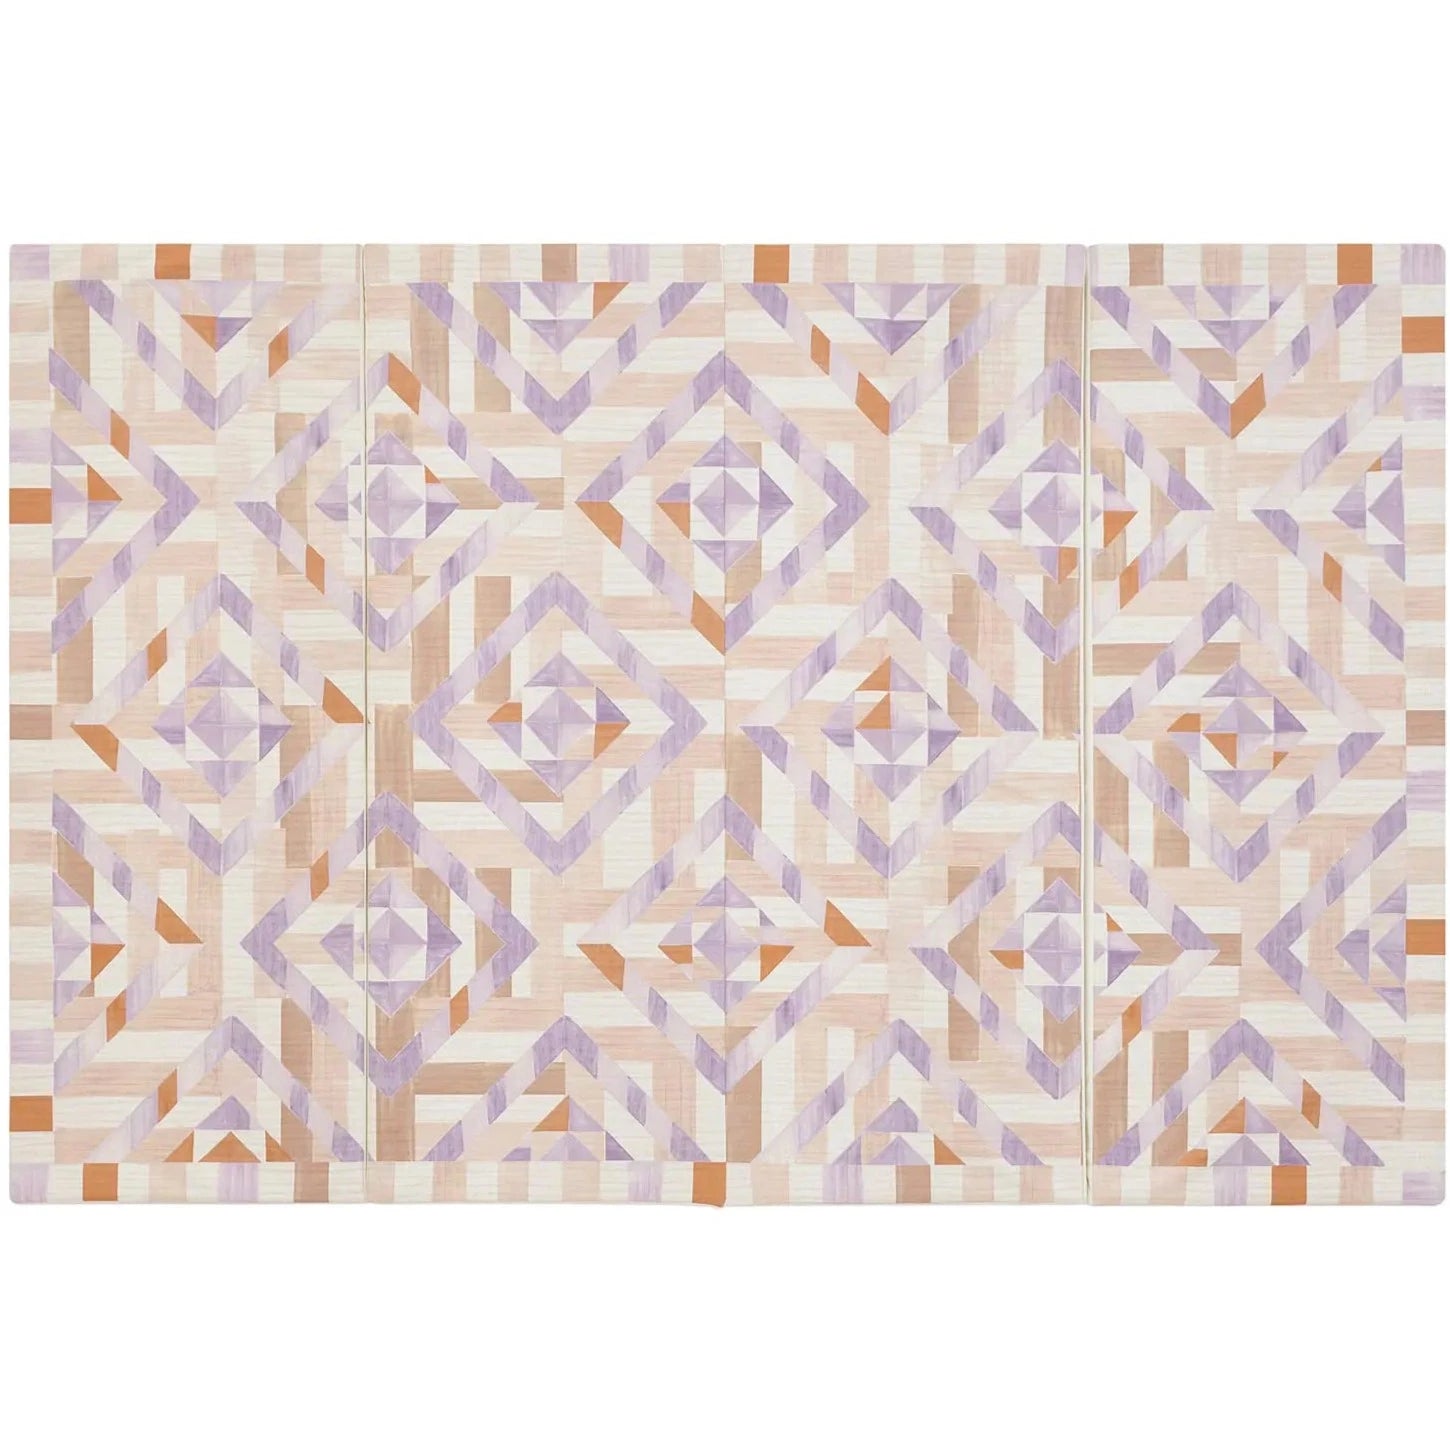 Marigold pink, purple, and orange quilt pattern tumbling mat, shown in size 4x6.